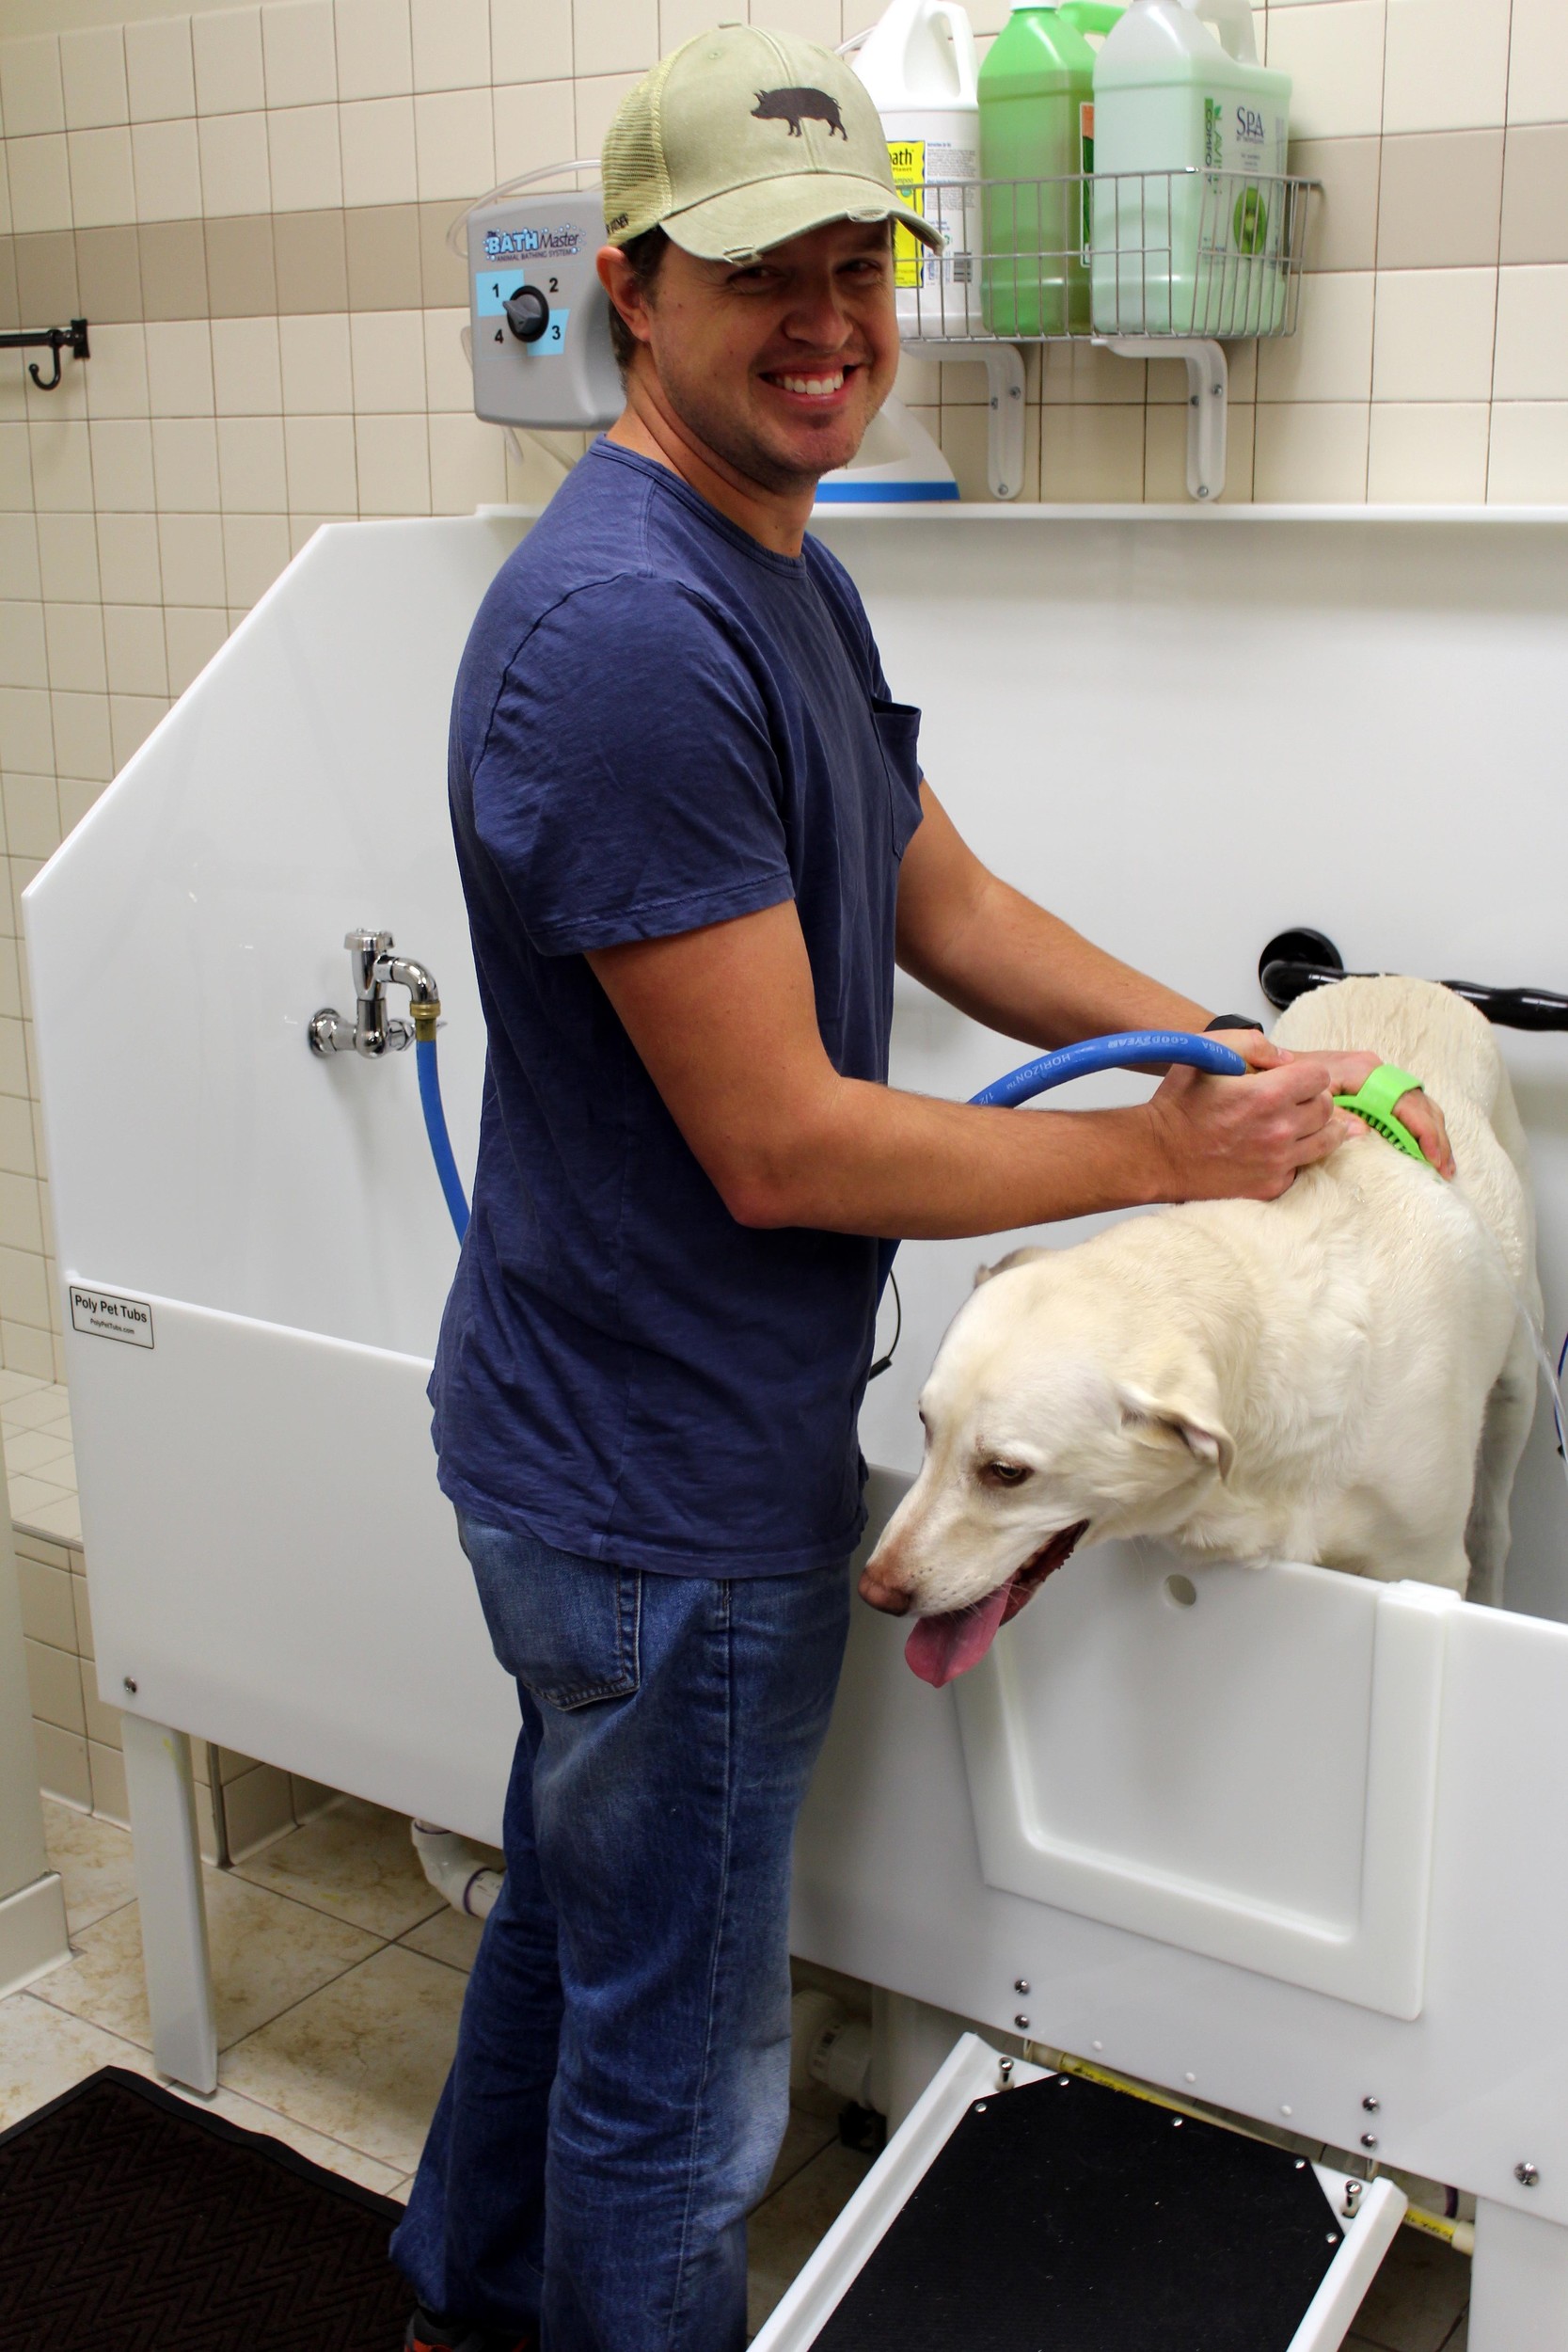 Winston Sheen of Ponte Vedra washes his dog, Remi, at one of EarthWise Pet’s self-wash stations. The store recently opened in Jacksonville Beach.